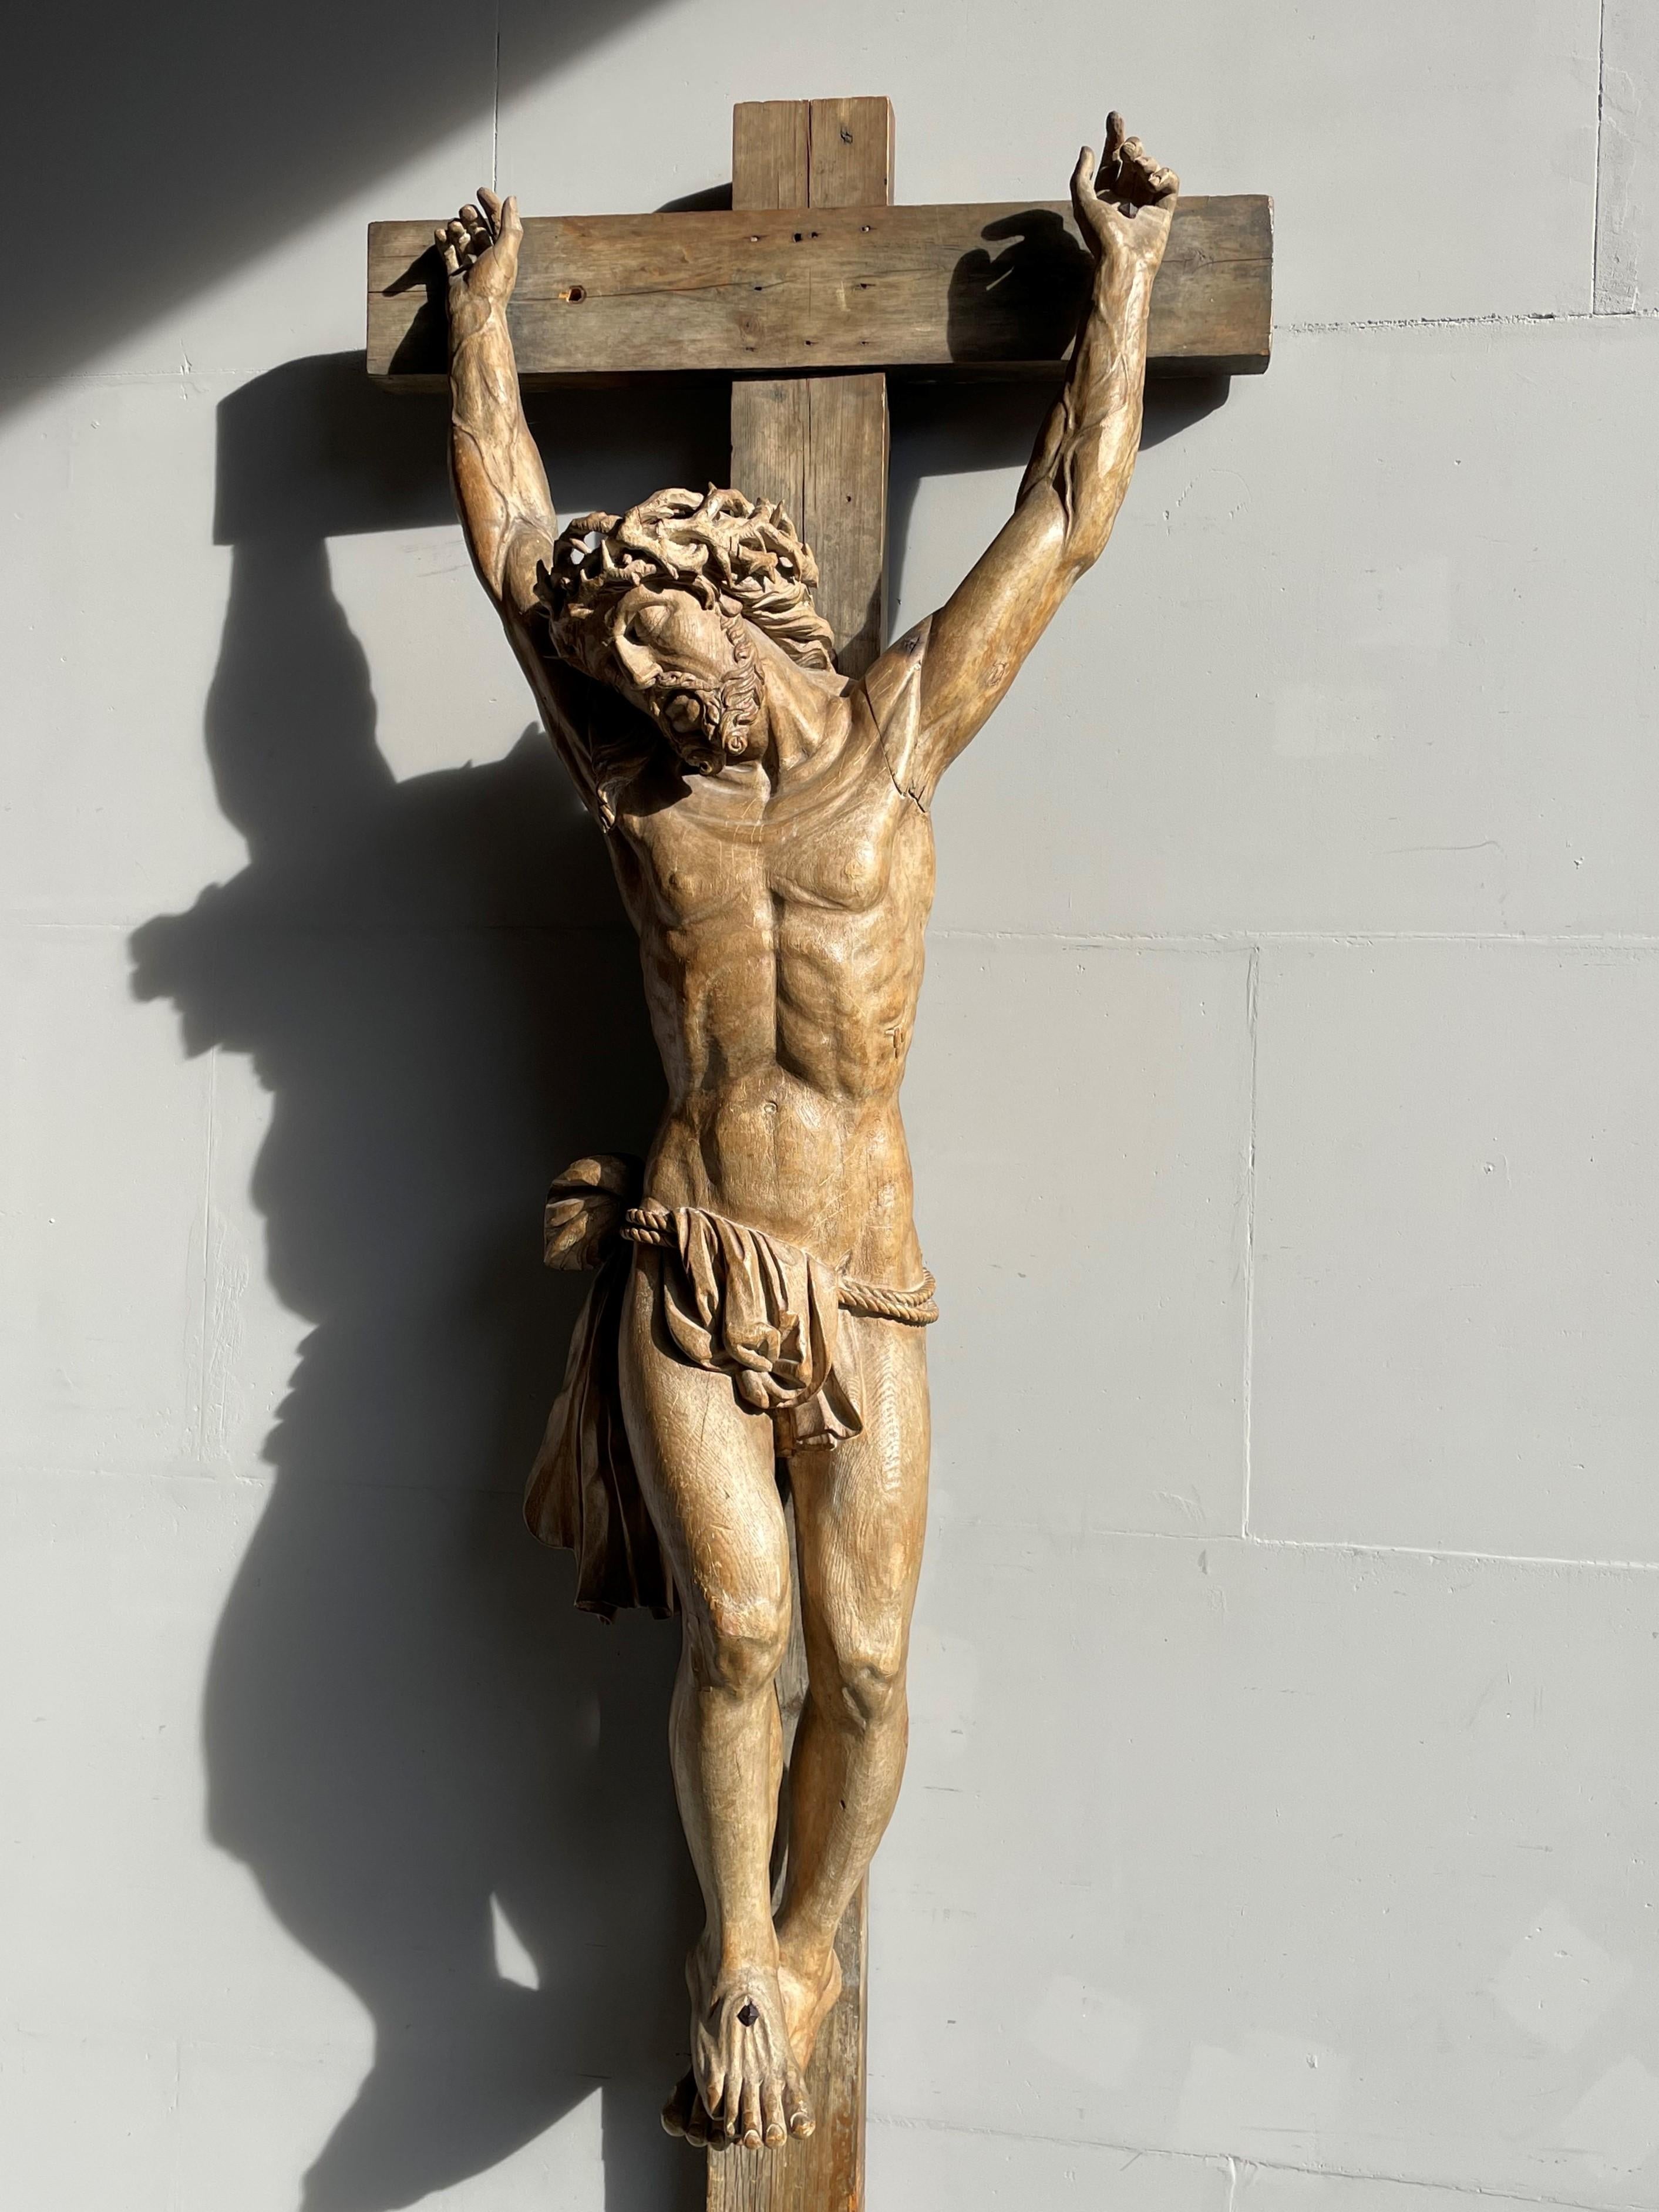 Rare and important church crucifix by master sculptor Petrus Franciscus Luypen (1763-1833) of Amsterdam.

For the collectors of only the rarest religious artefacts we also have this striking, museum worthy and important, antique corpus of Christ on